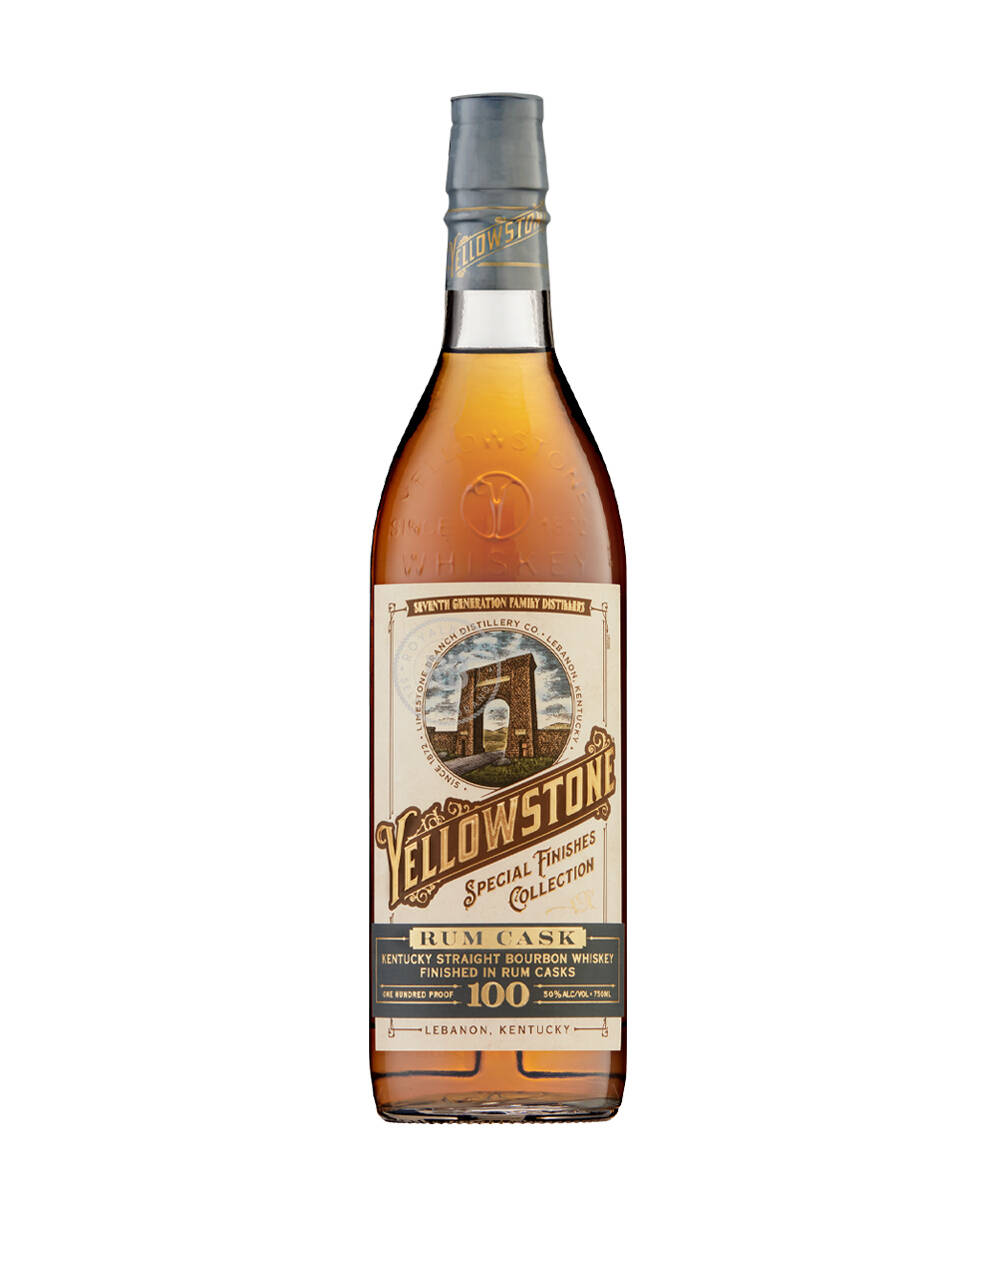 Yellowstone Special Finishes Collection Rum Cask Bourbon Whiskey